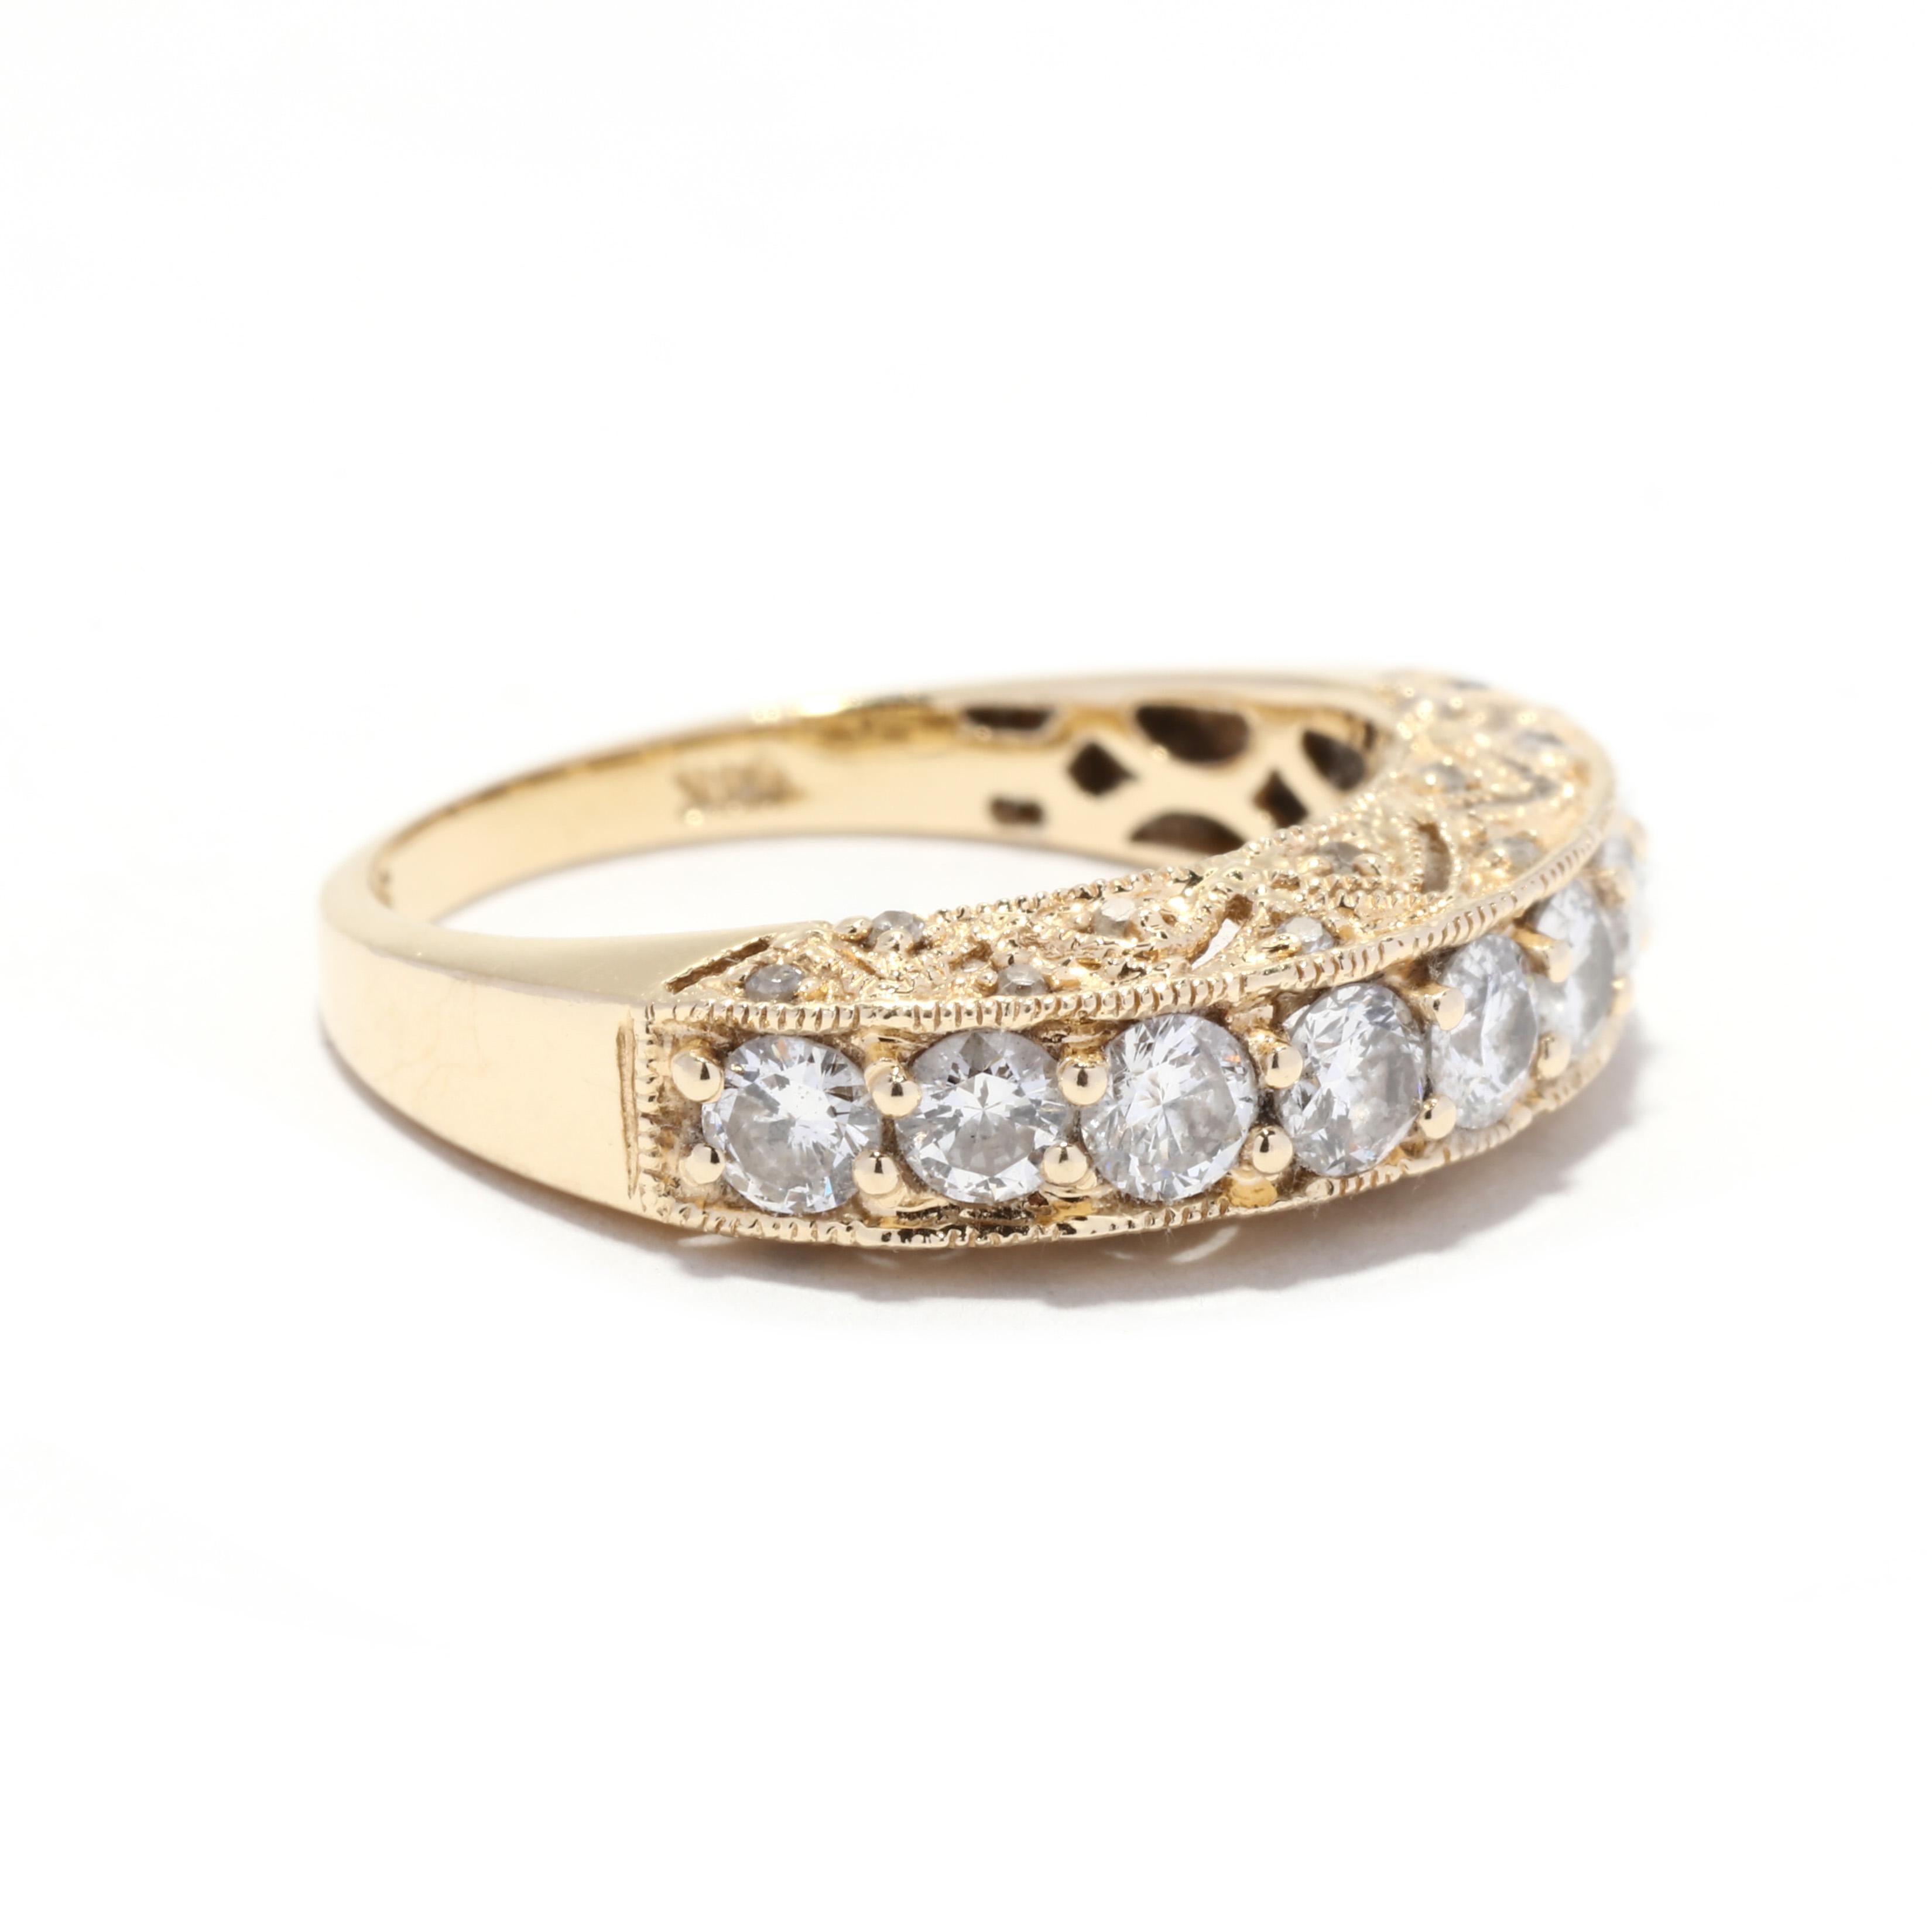 A 14 karat yellow gold nine stone diamond wedding band. This stackable band features a slightly domed band set with nine full cut round diamonds weighing approximately 1 total carat and with a pierced milgrain detailed profile set with single cut